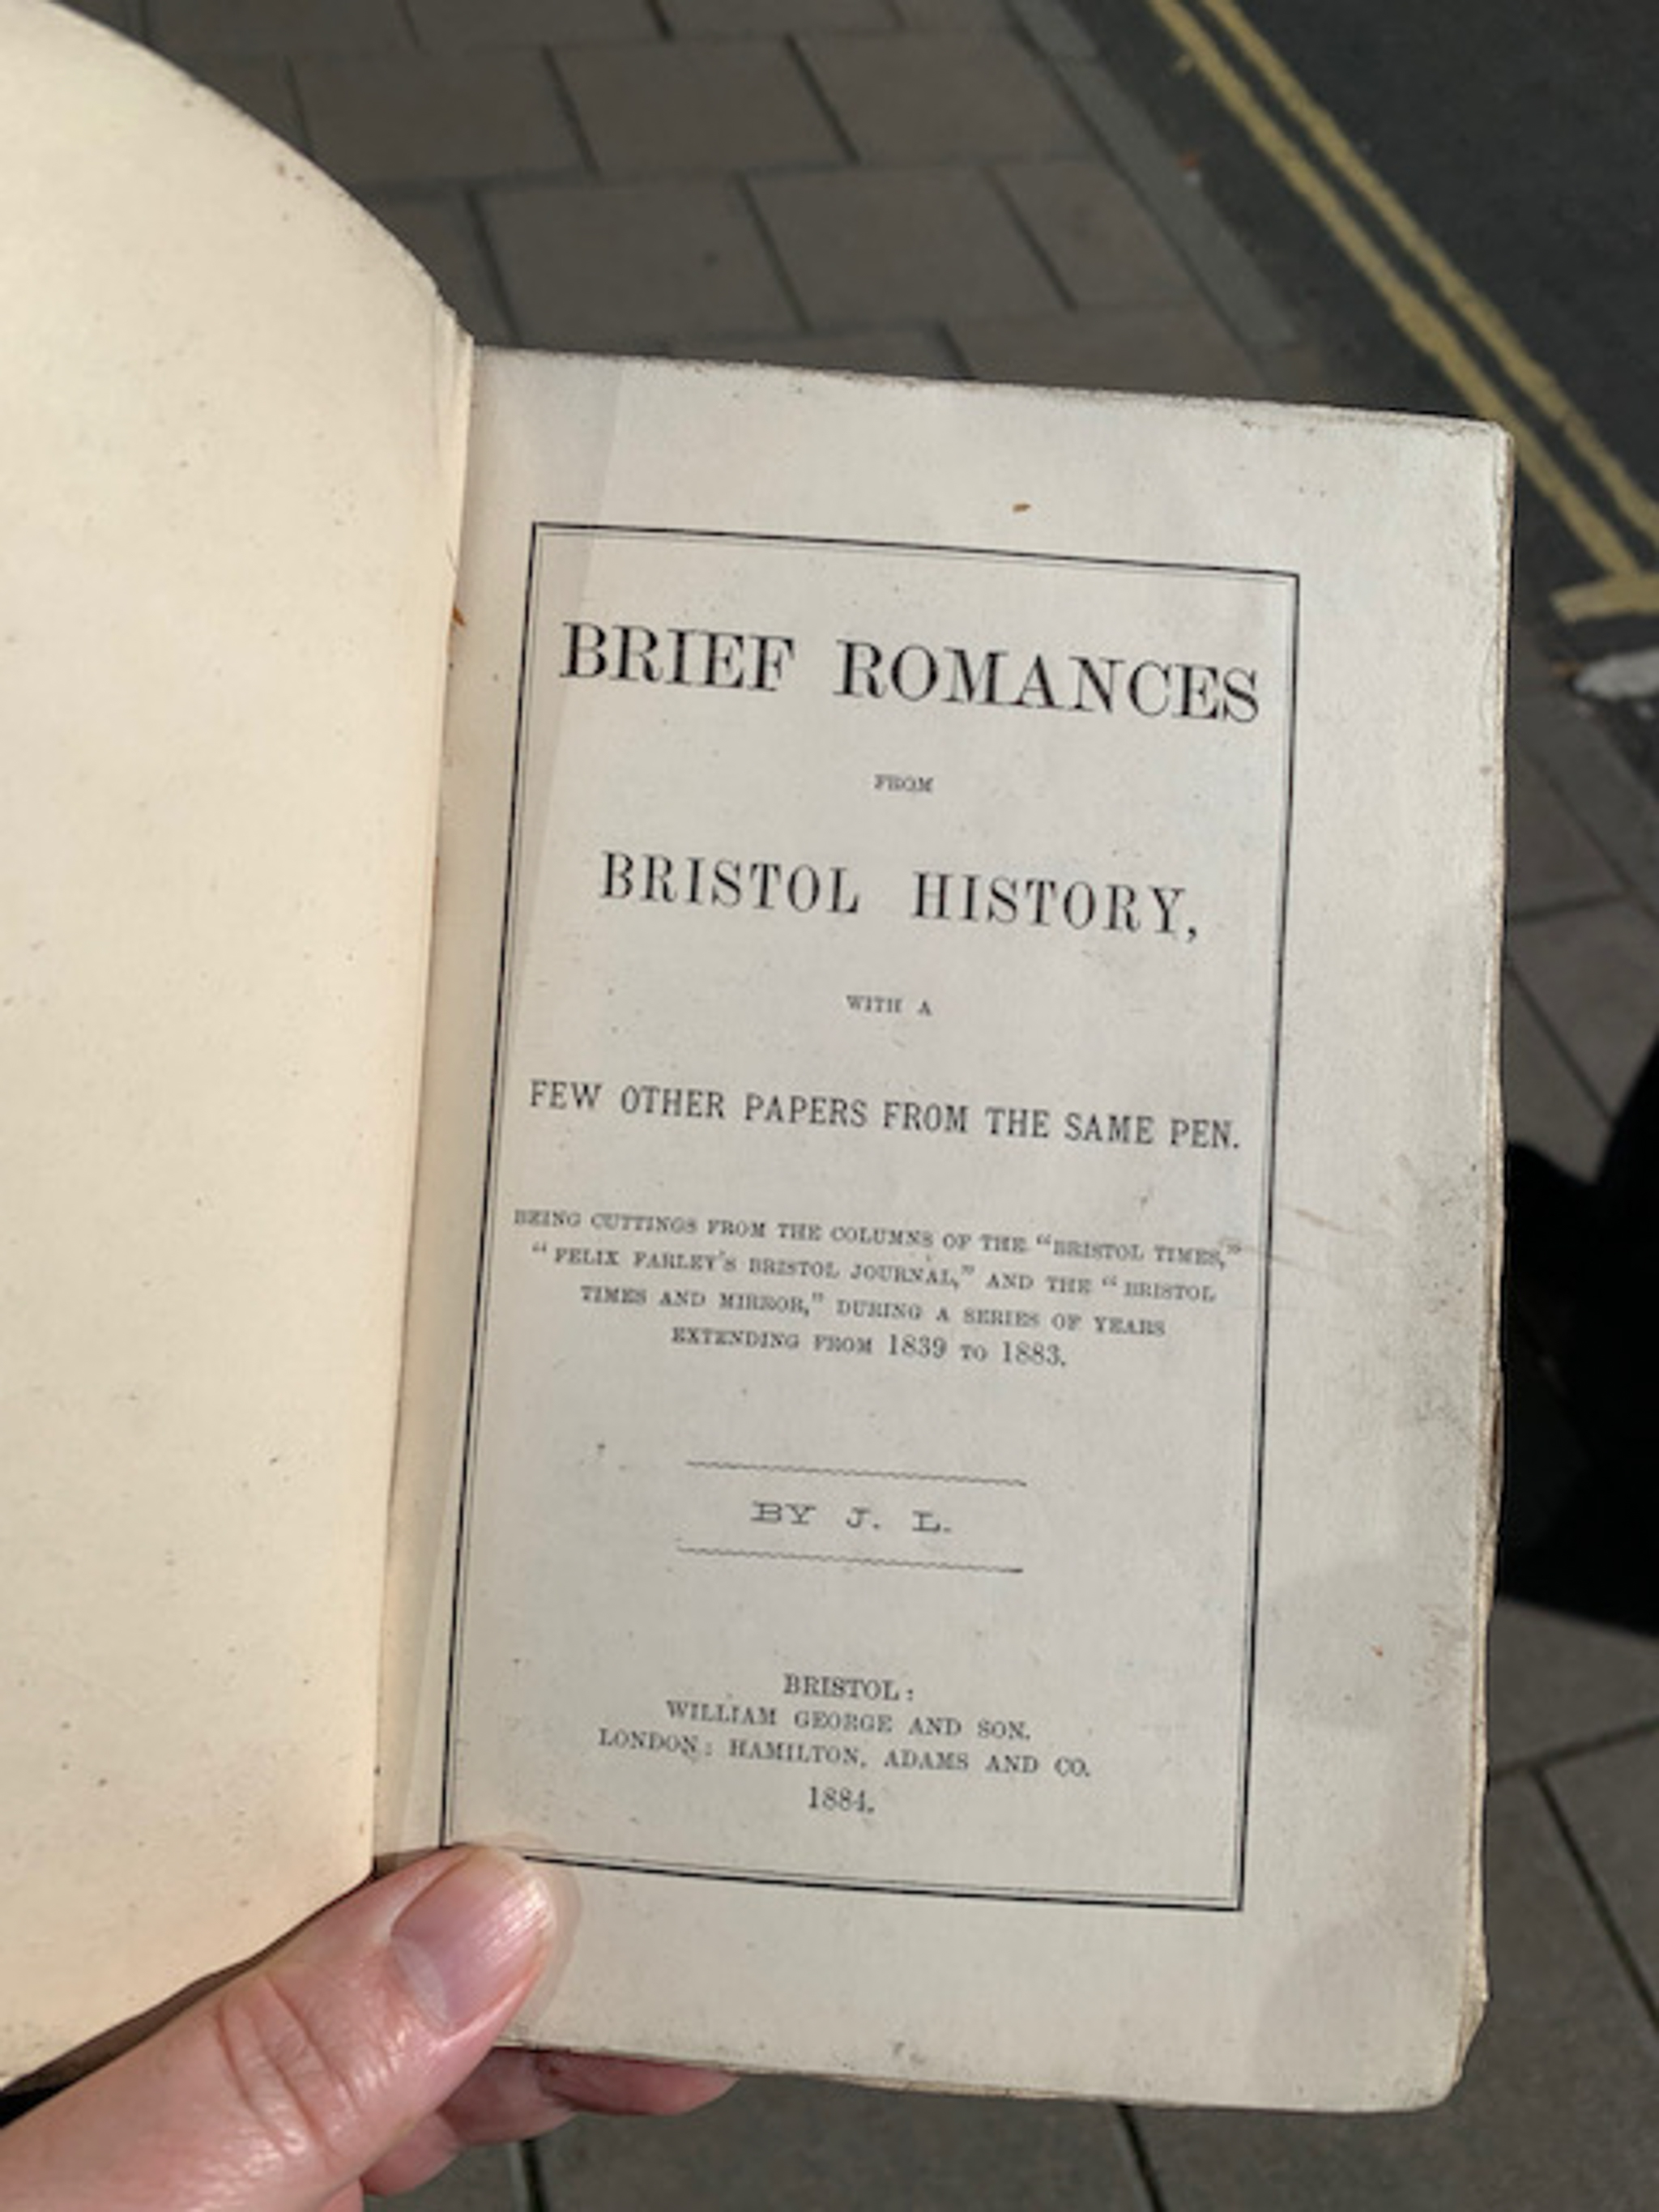 Brief Romances from Bristol History
Apologies for the poor picture quality; it was a quick snap from the iPhone. There's a better picture on t'blog. It's notable that this book was wr...